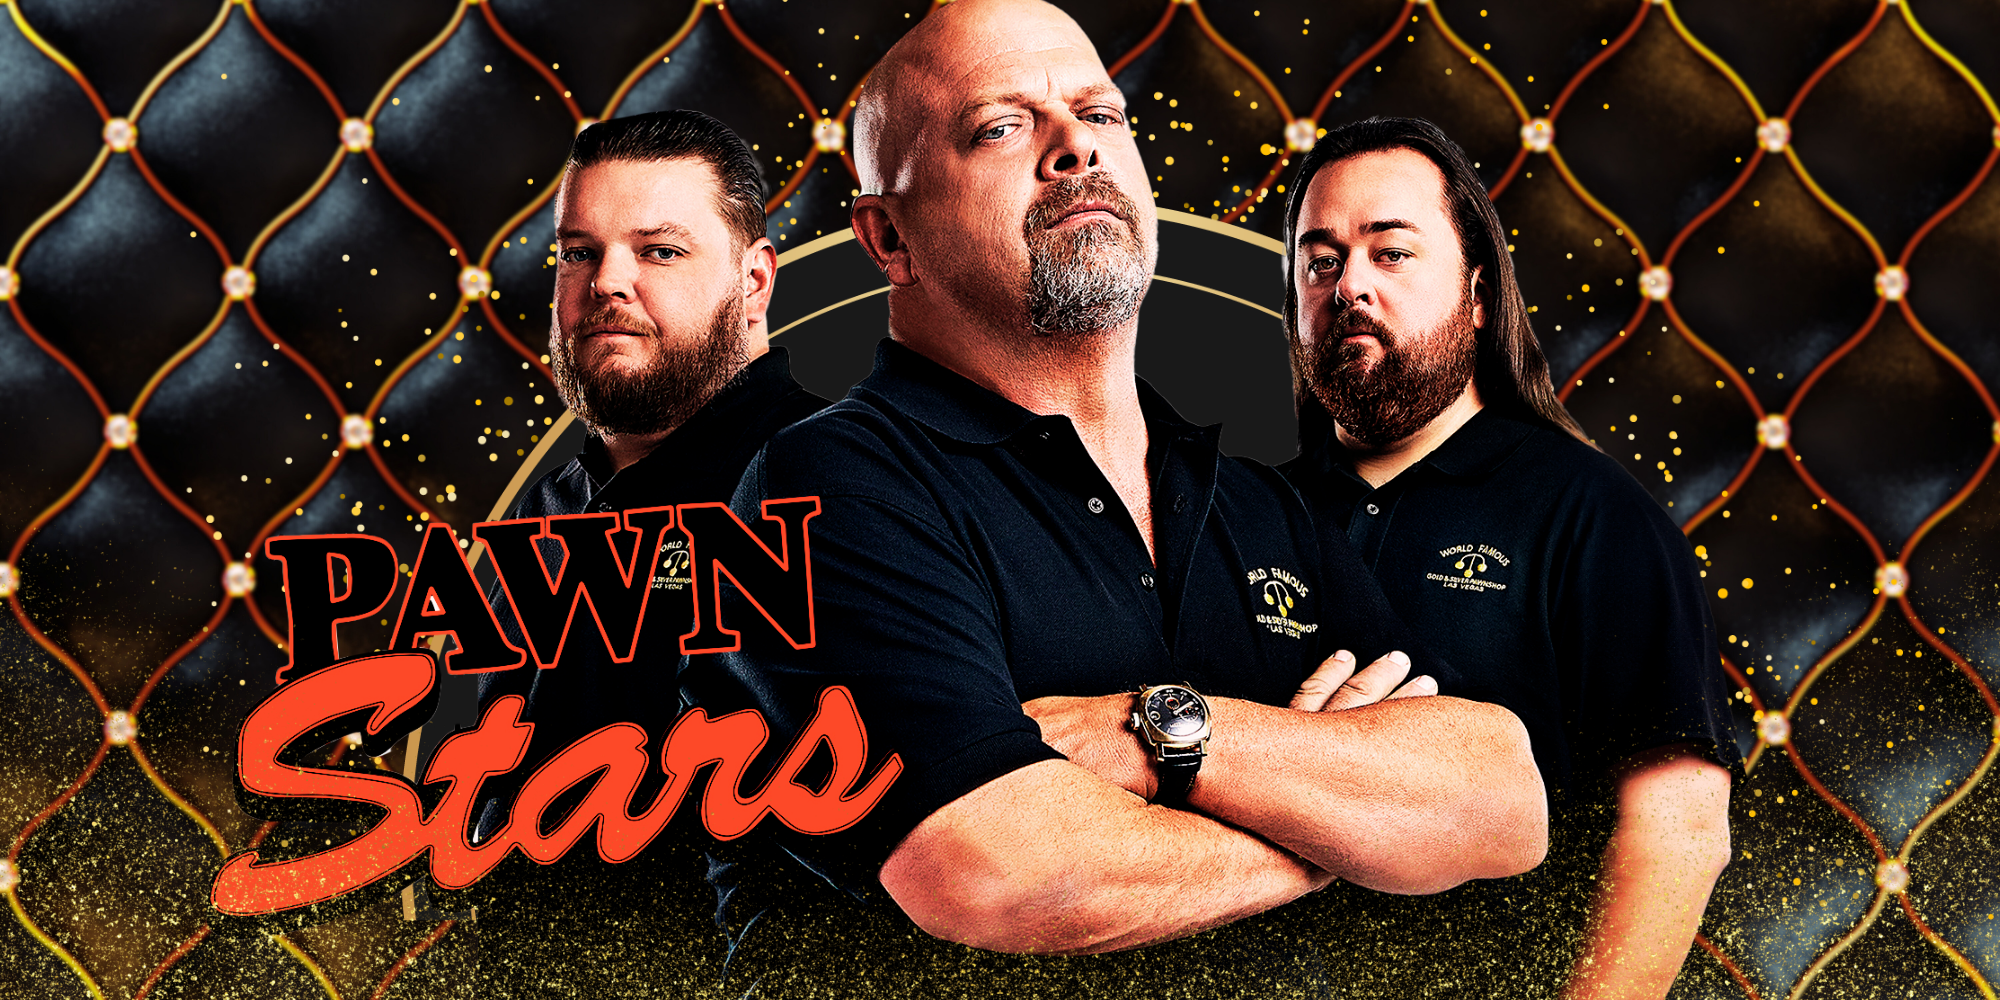 Pawn Stars Cast Rick Harrison, Corey Harrison and Chumlee posing with menacing looks and folded arms for promo